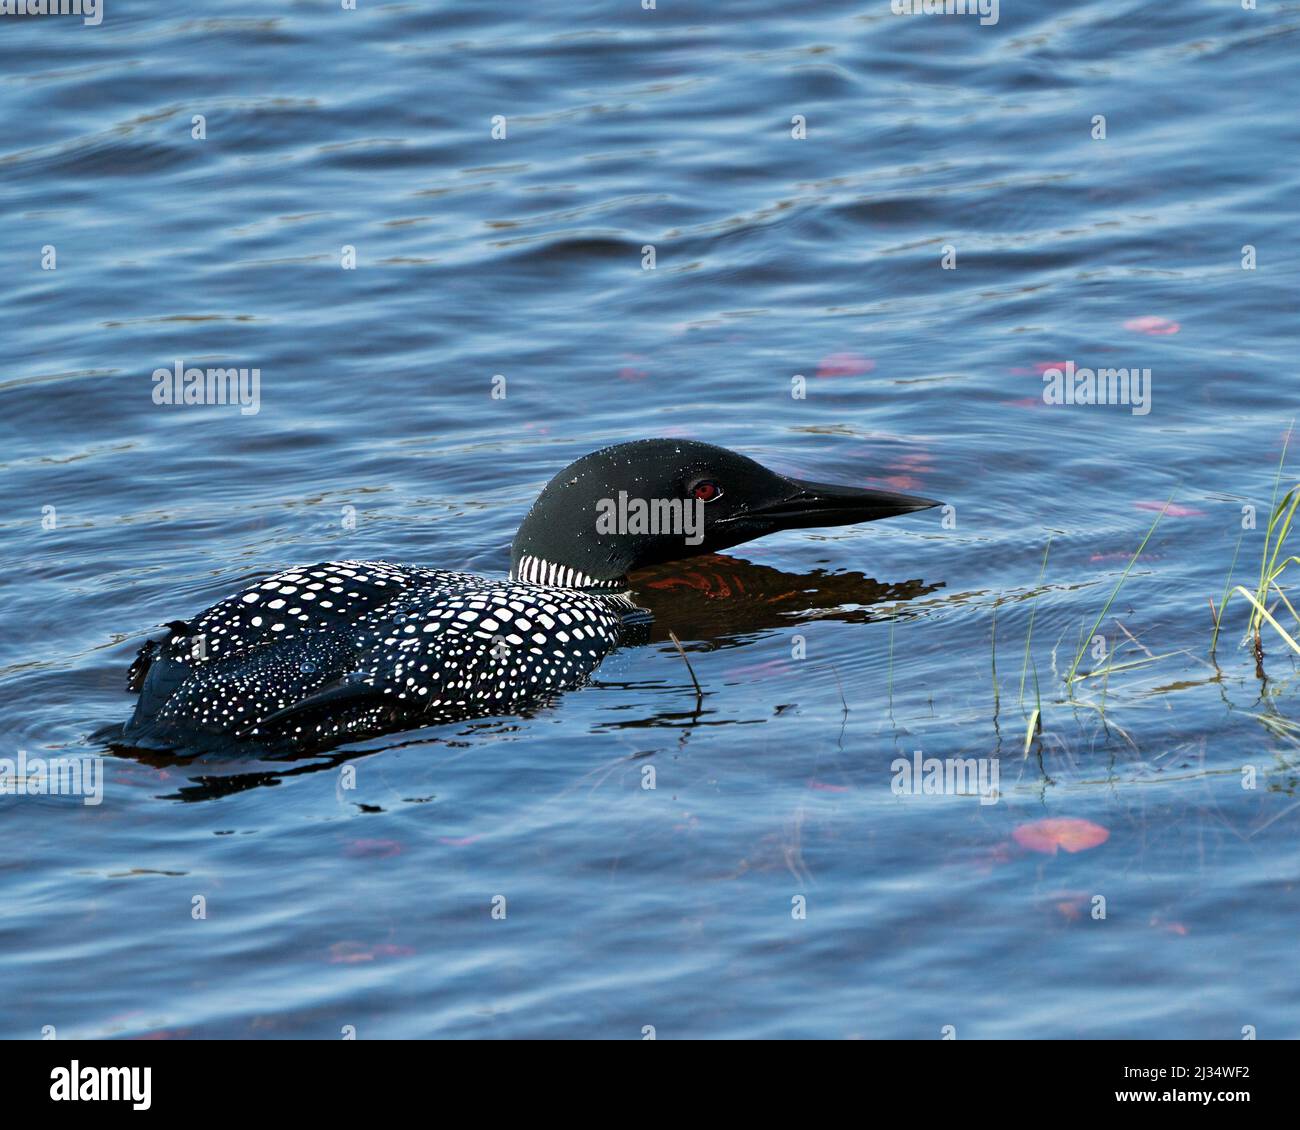 Loon close-up profile side view swimming in the lake in its environment and habitat, displaying red eye, white and black feather plumage. Stock Photo